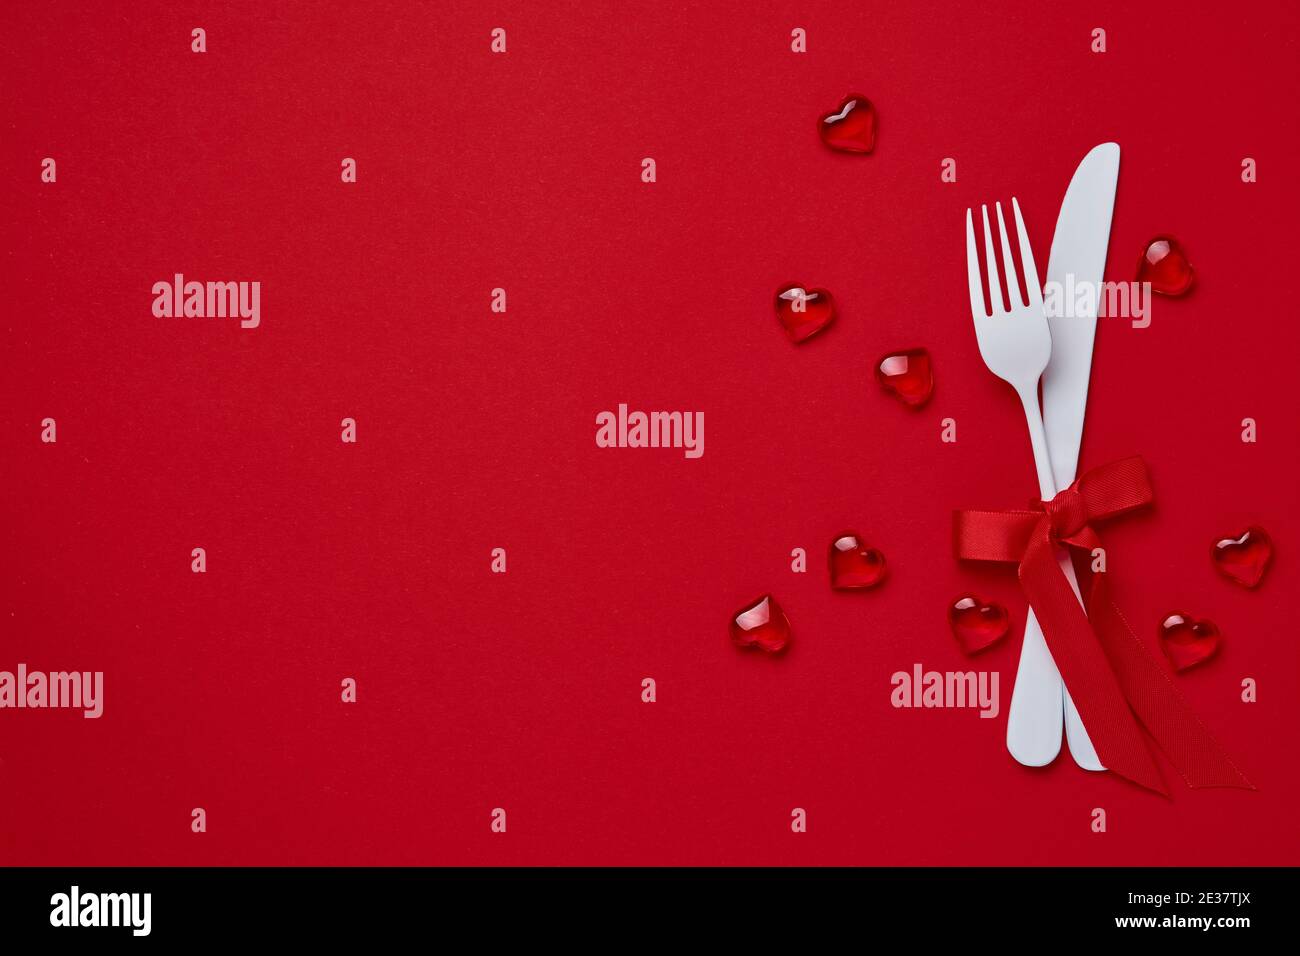 Valentines day background or concept with empty white plate, small heart-shaped plate with small hearts inside and whiteware on scarlet or red backgro Stock Photo